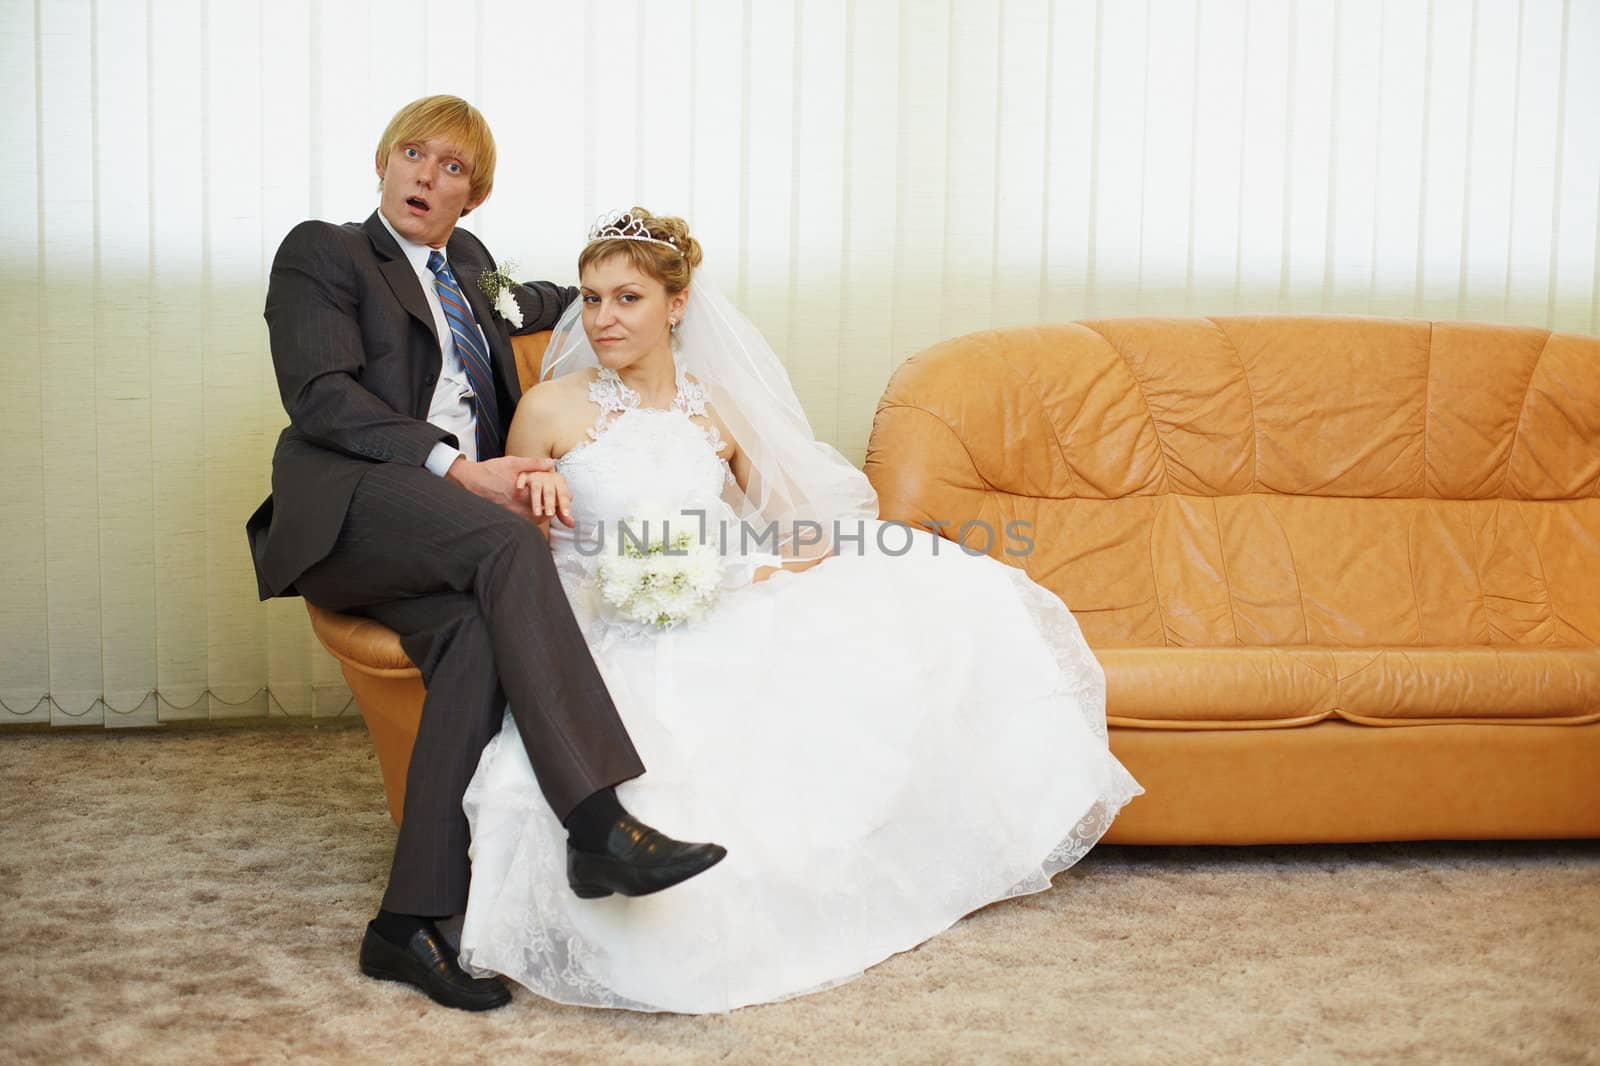 Amusing groom and the bride pose sitting on an armchair